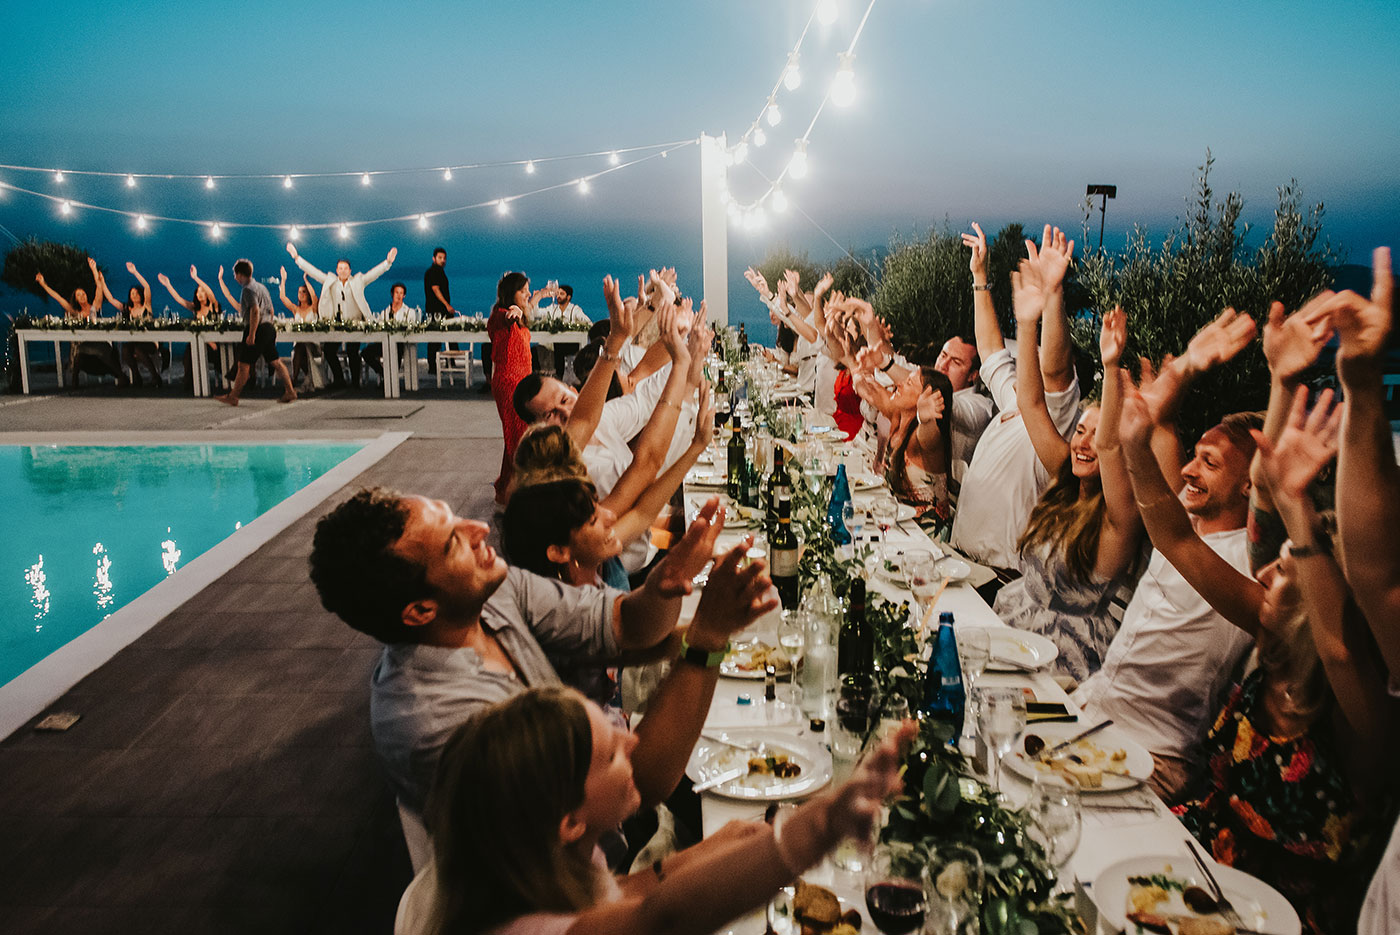 Venue <a href="https://wedinspire.com/wedding-venues/santorini/thermes-villas-and-spa/" target="_blank" rel="noopener noreferrer">Thermes Villa and Spa</a> | Photo by <a href="https://www.benwyattphotography.com/" target="_blank" rel="noopener noreferrer">Ben Wyatt Photography</a>